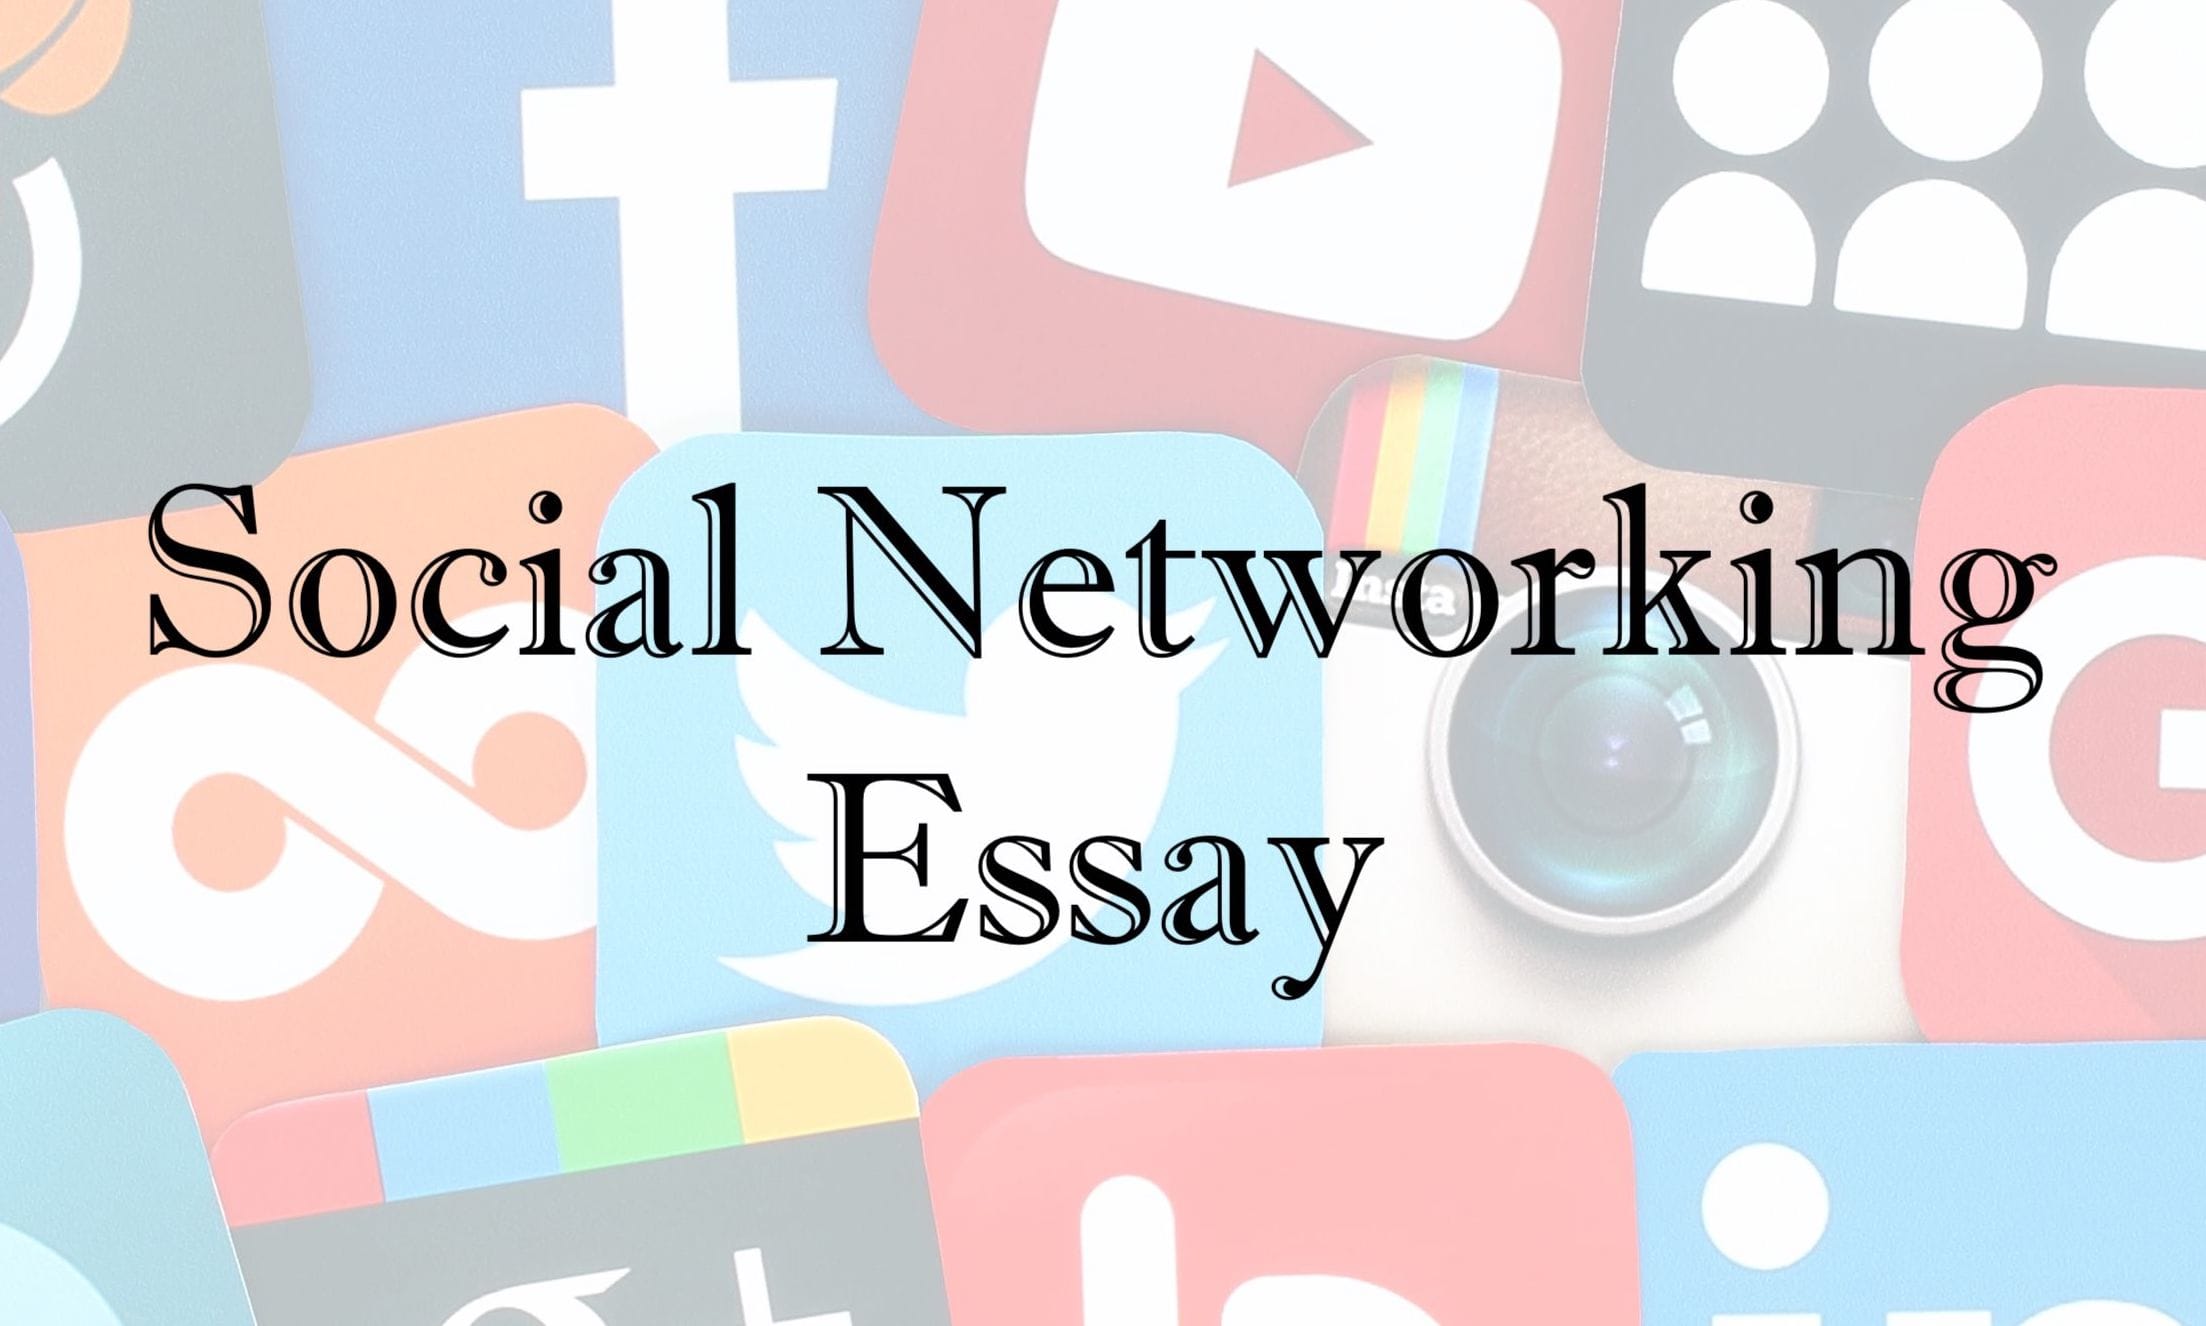 Social Networking Essay in English for Students in 300 Words